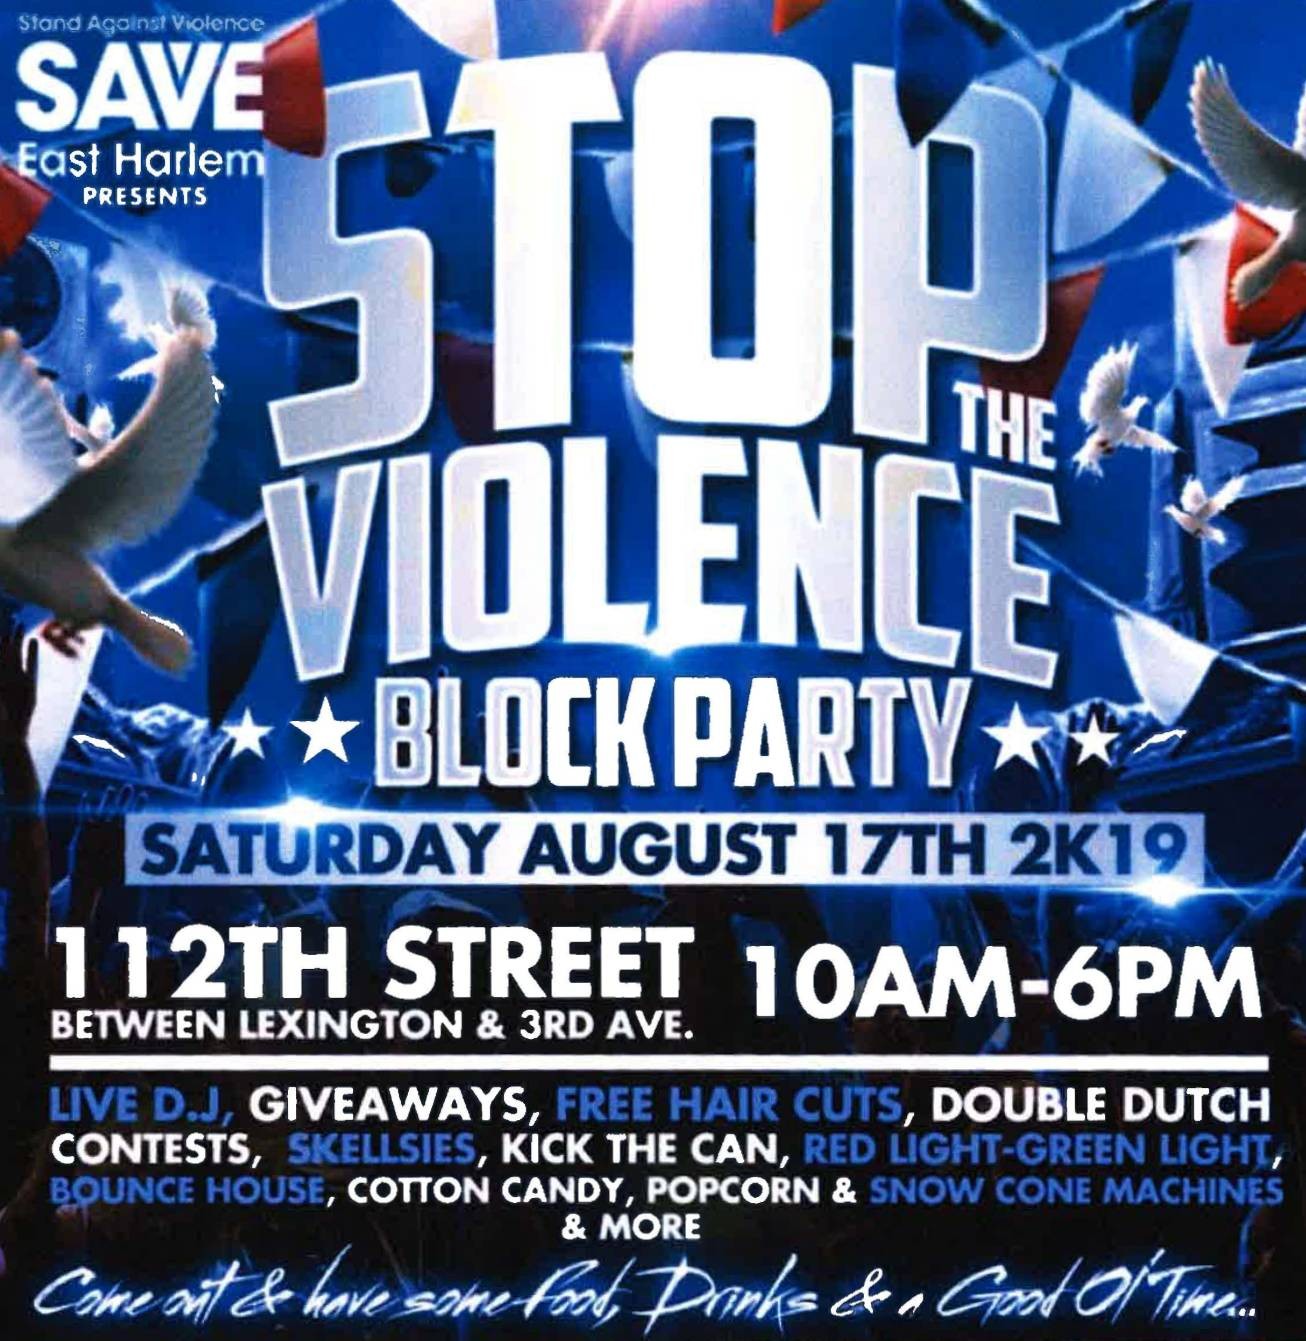 Stop the Violence Block Party Flyer with information about date, time, and activities